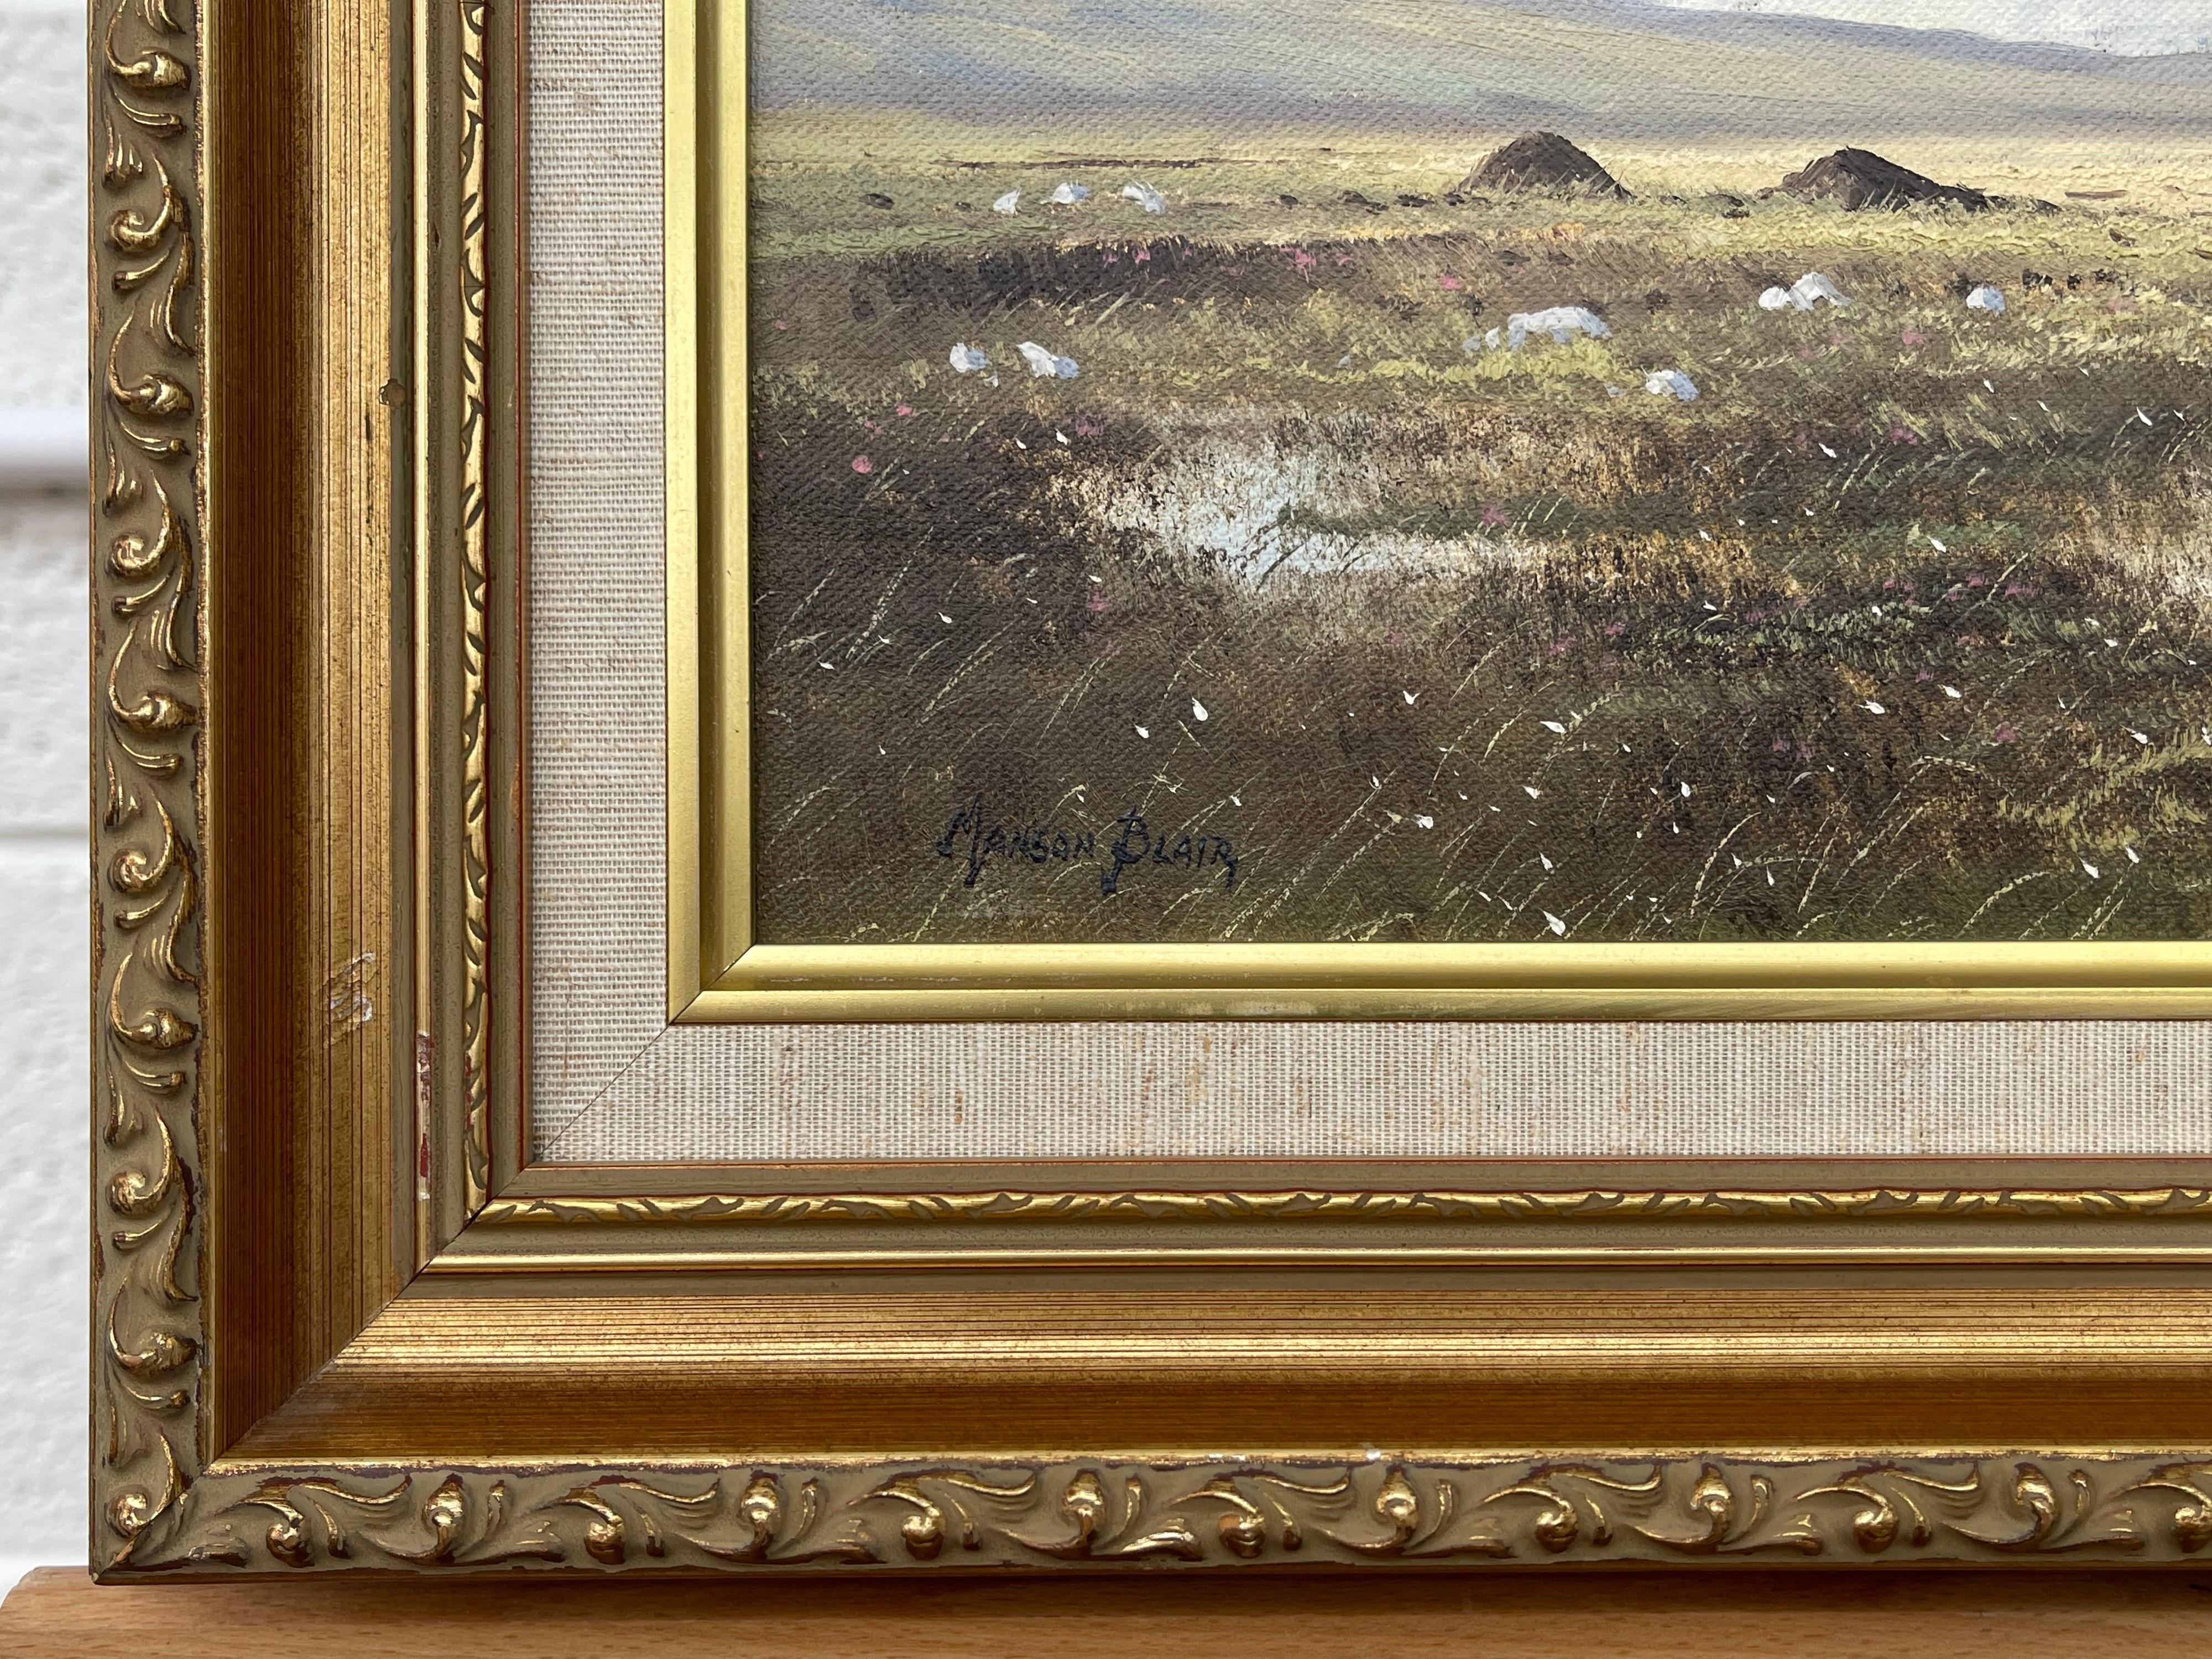 Original Oil Painting Slemish Mountain County Antrim Ireland by Irish Artist, Manson Blair

Art measures 12 x 9 inches 
Frame measures 15 x 12 inches 

Born in 1947 near Ballyclare in Northern Ireland, Manson developed a passion for art early on in